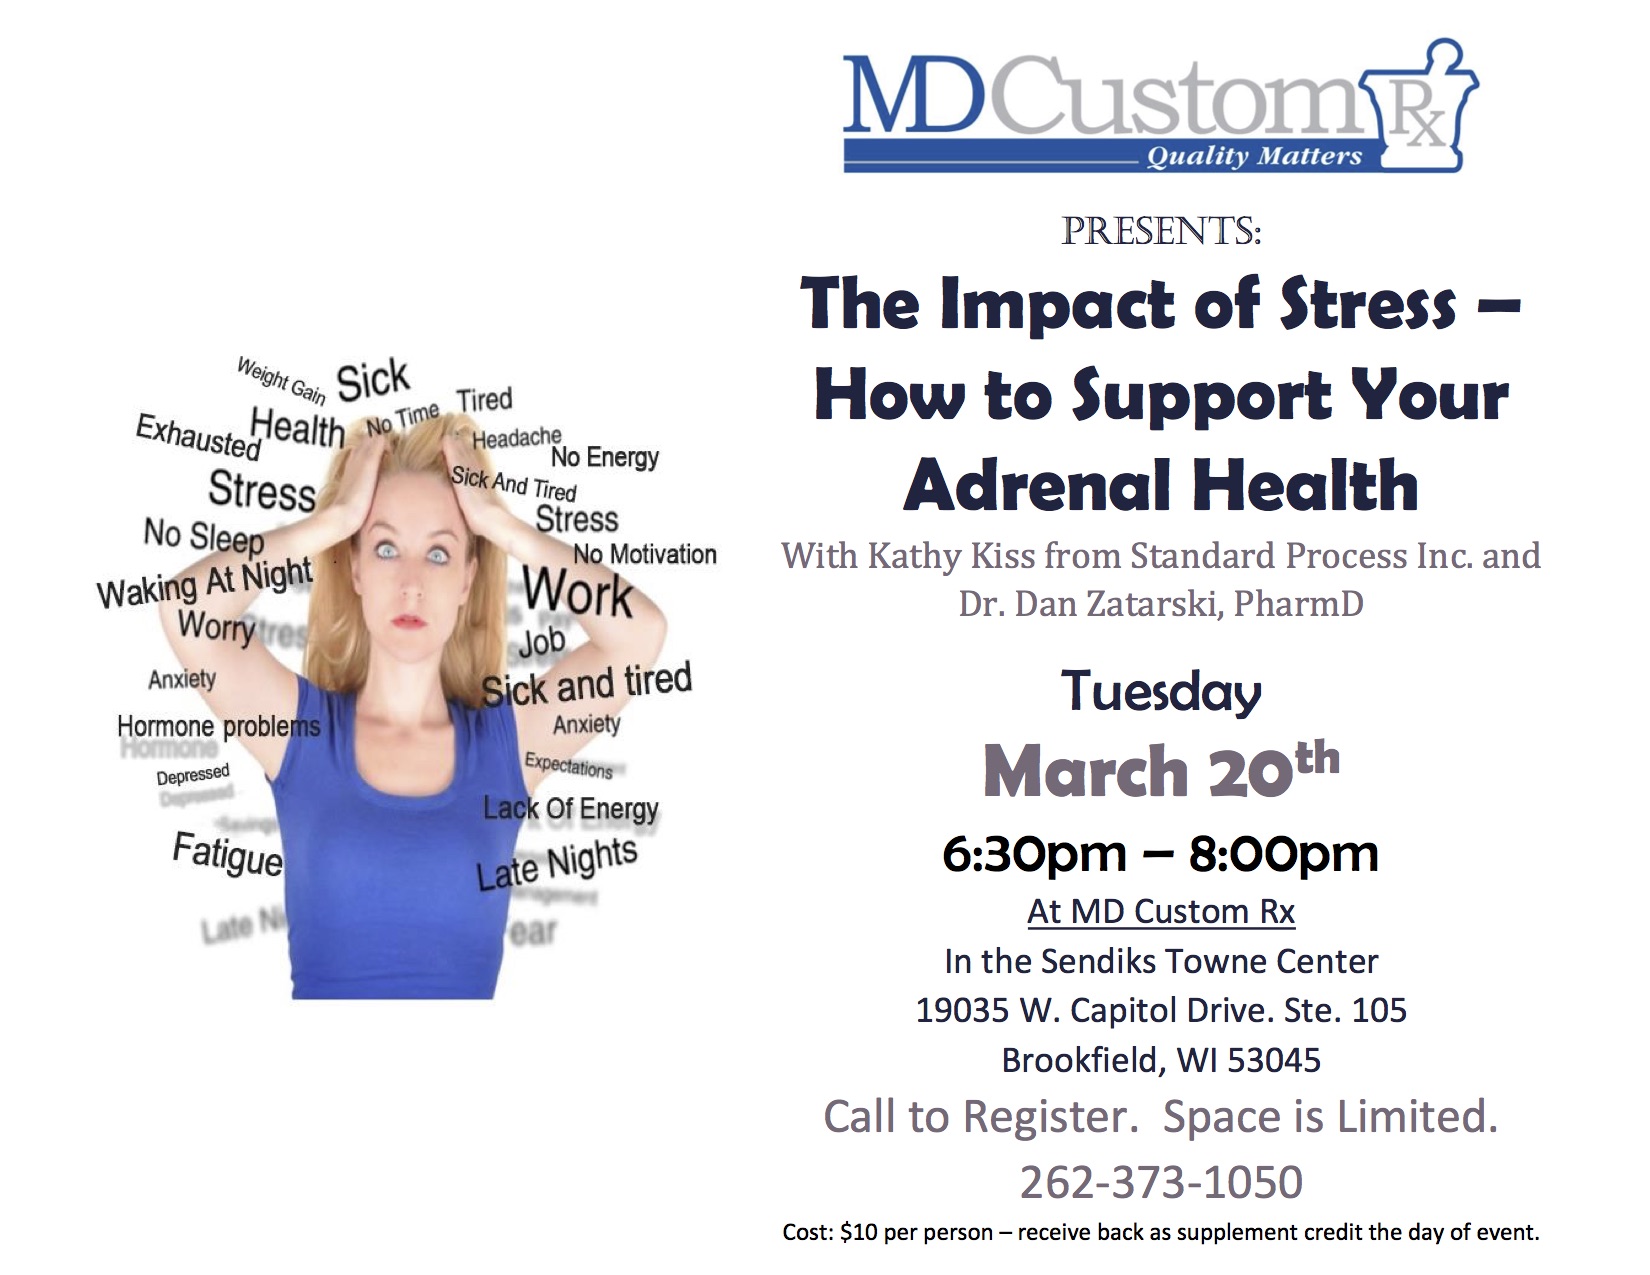 The Impact of Stress – How to Support Your Adrenal Health With Kathy Kiss from Standard Process Inc. and Dr. Dan Zatarski, PharmD